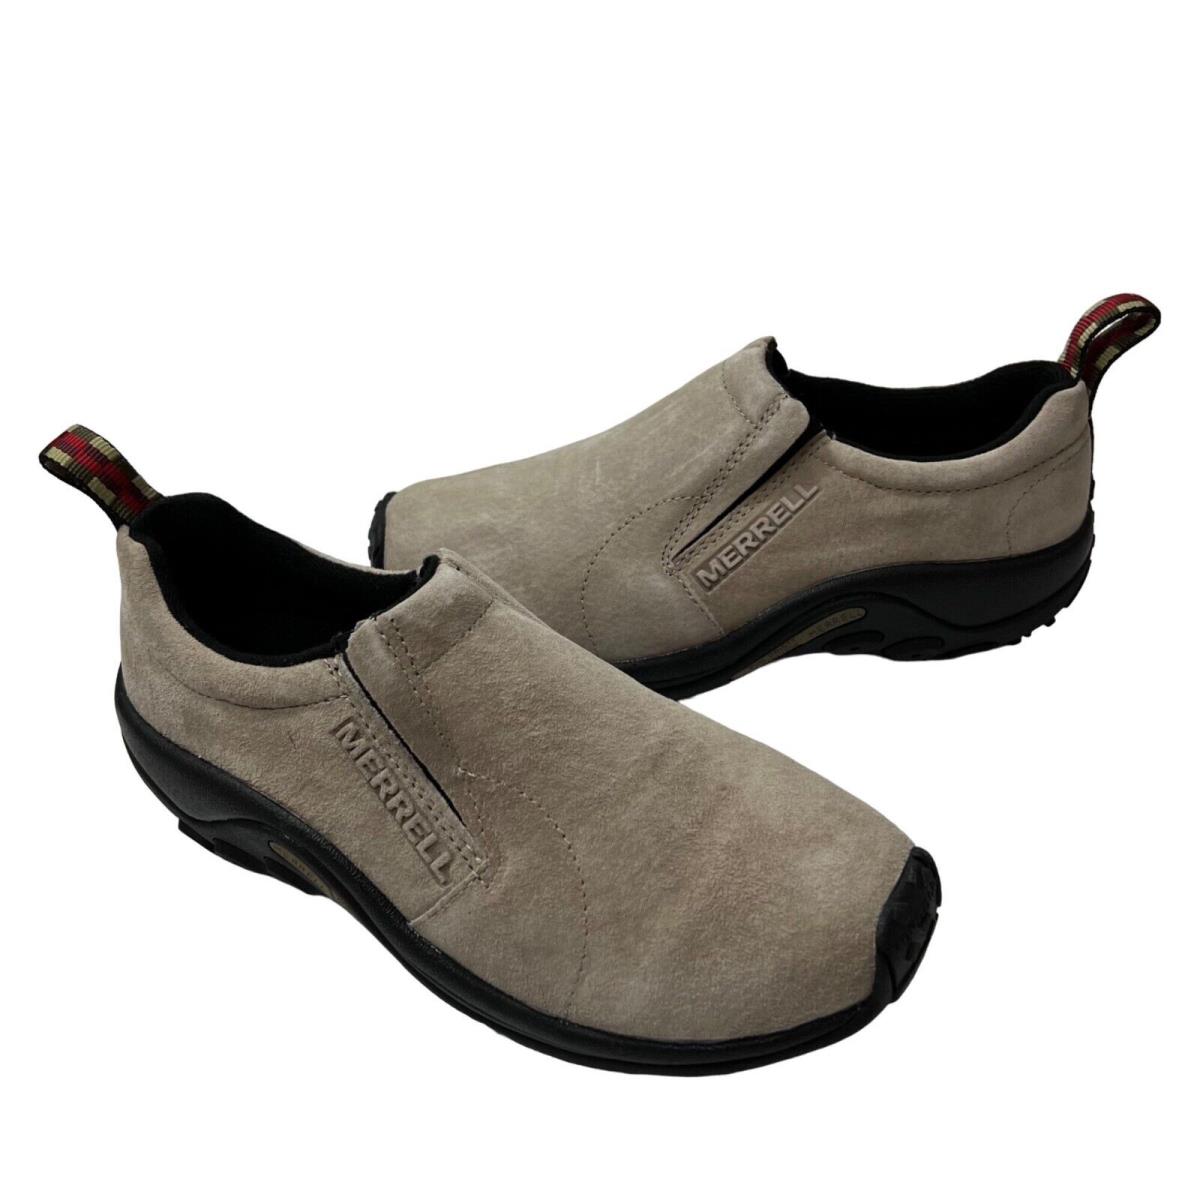 Merrell Jungle Moc Slip On Shoes Taupe Suede Womens 8